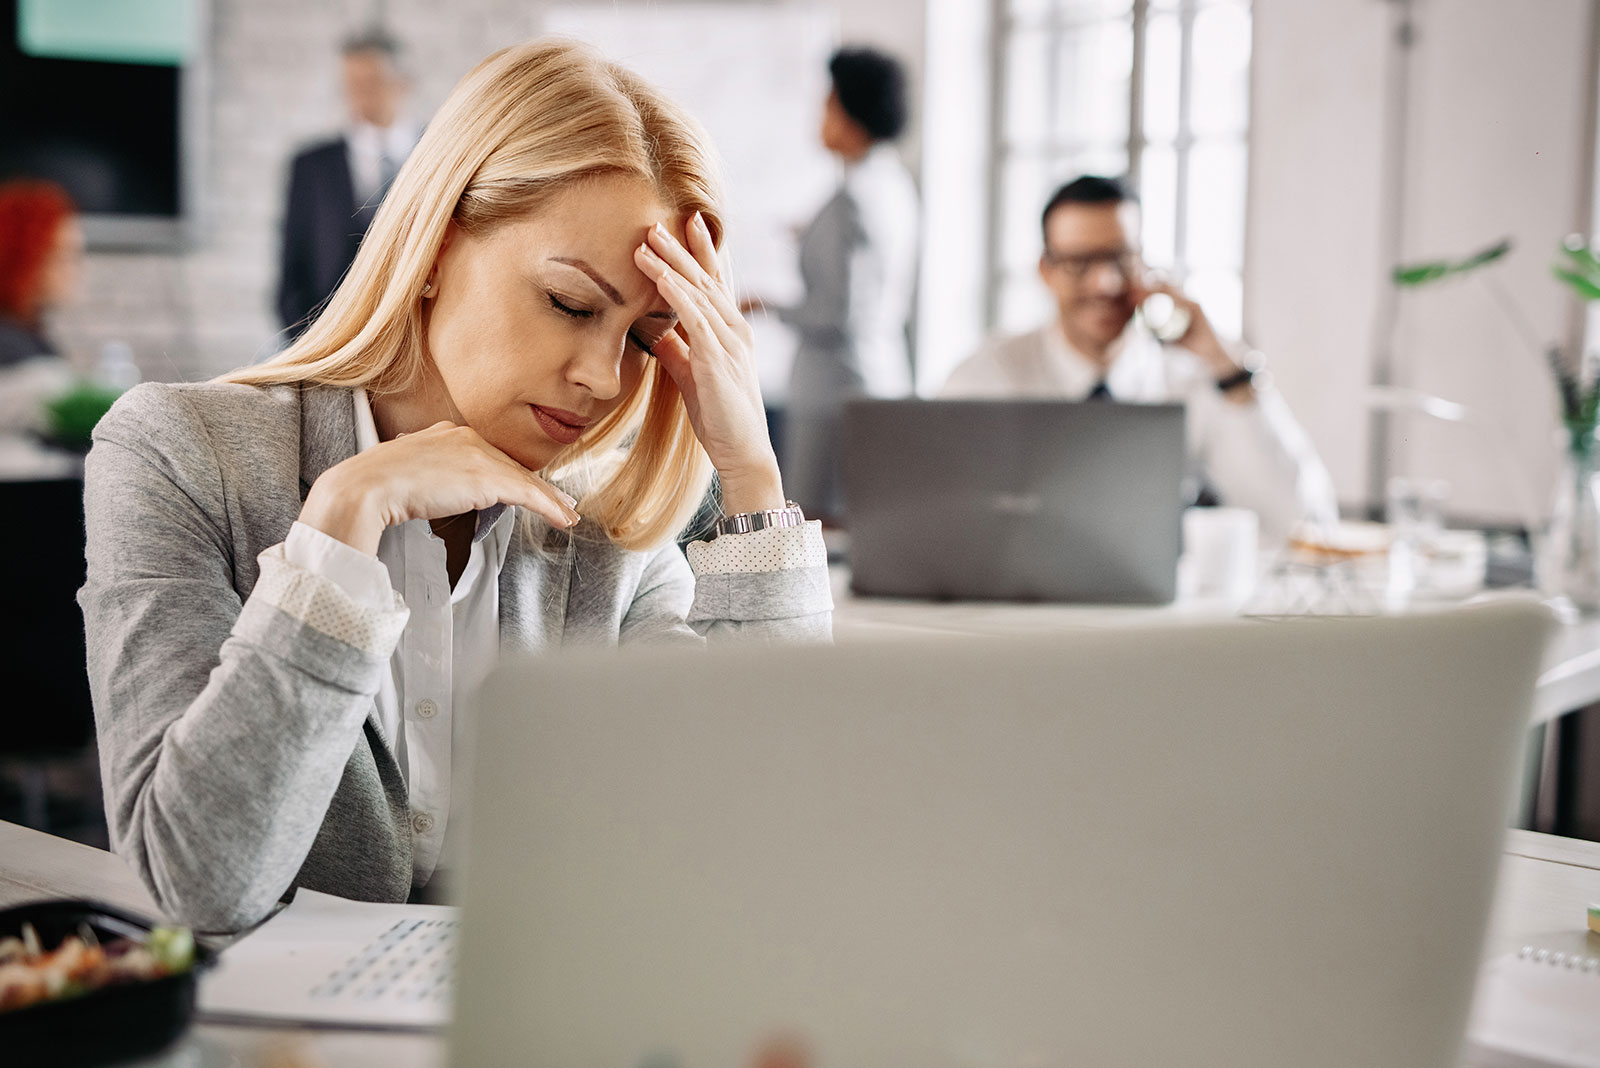 How to effectively deal with professional burnout?